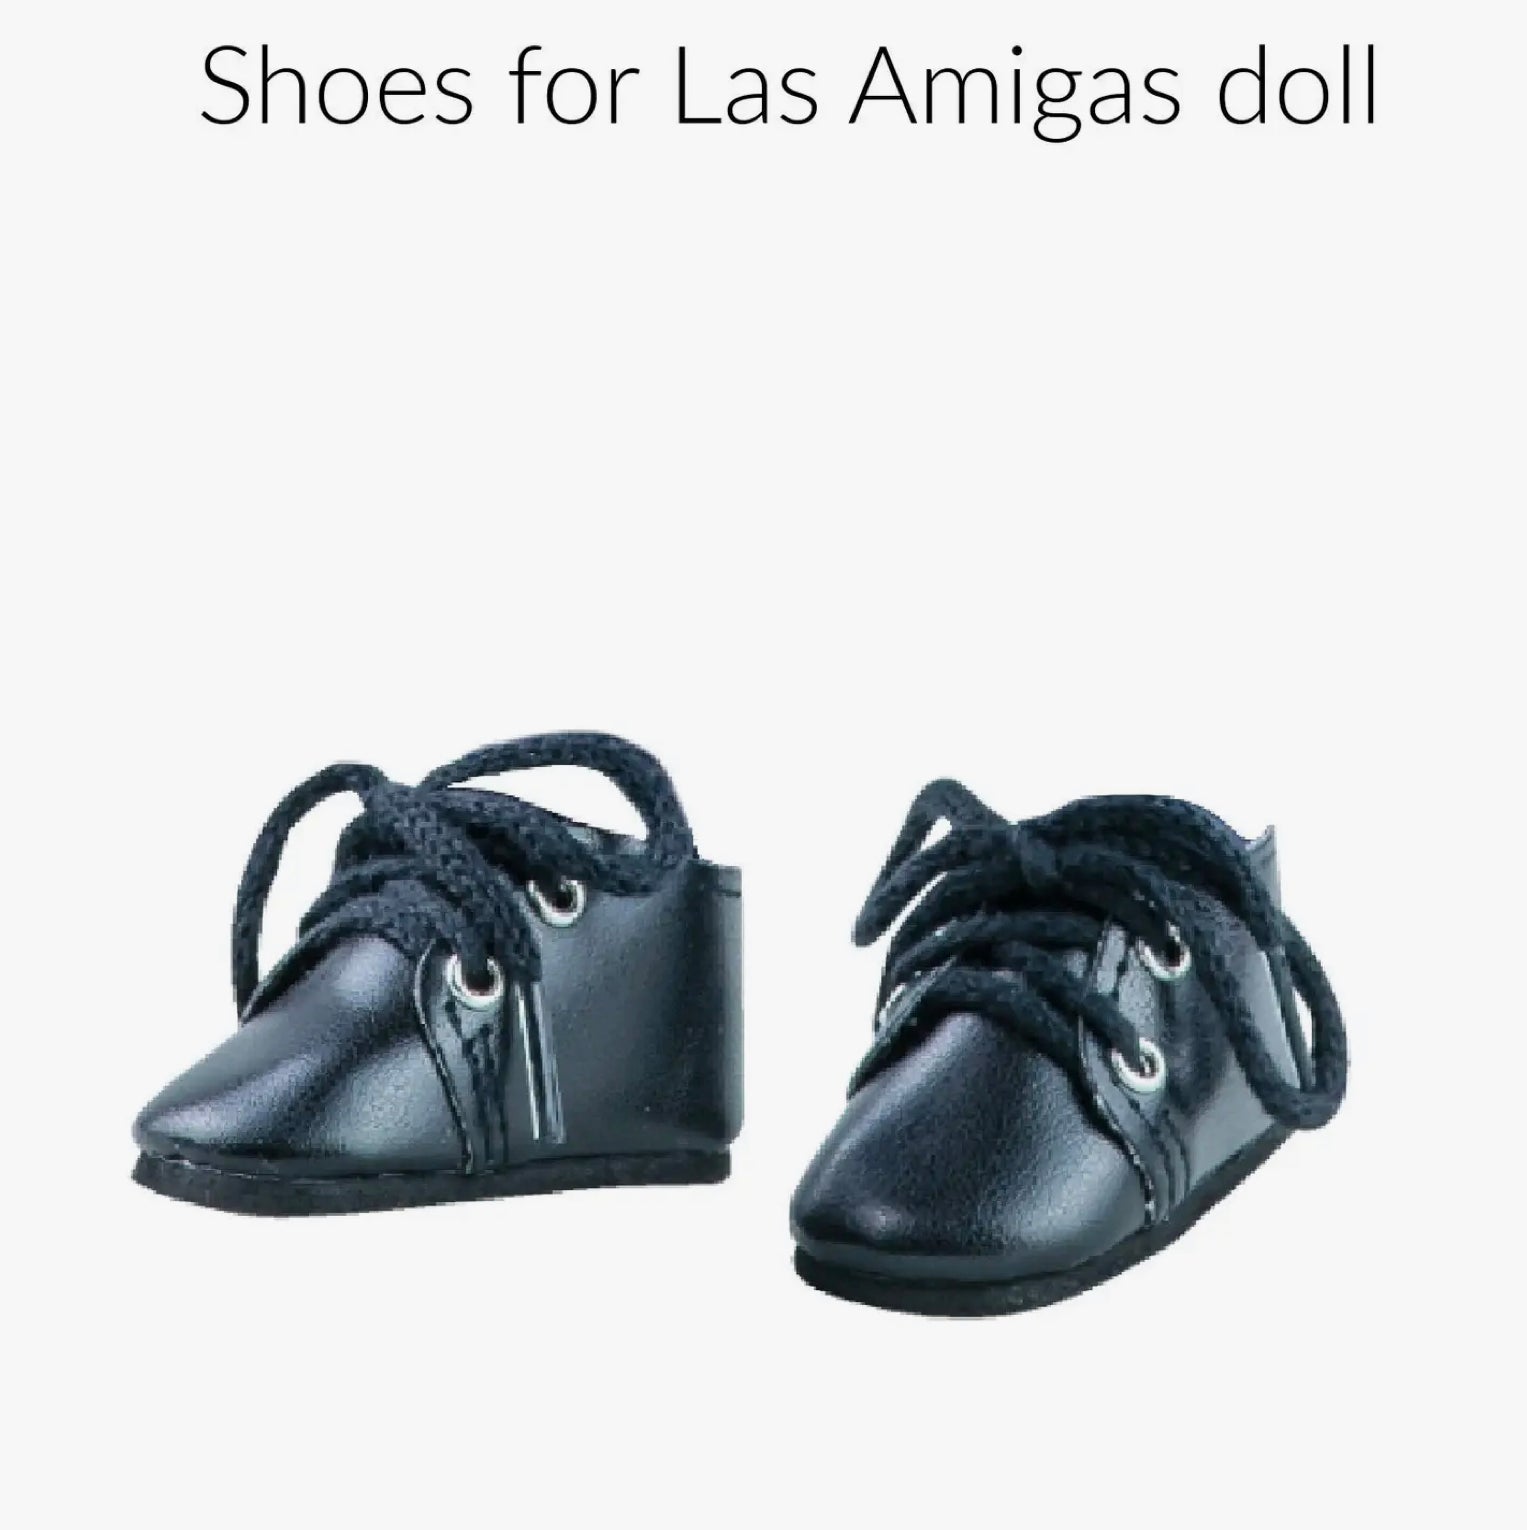 Paola Reina Amigas Doll Shoes - Black Lace-Up